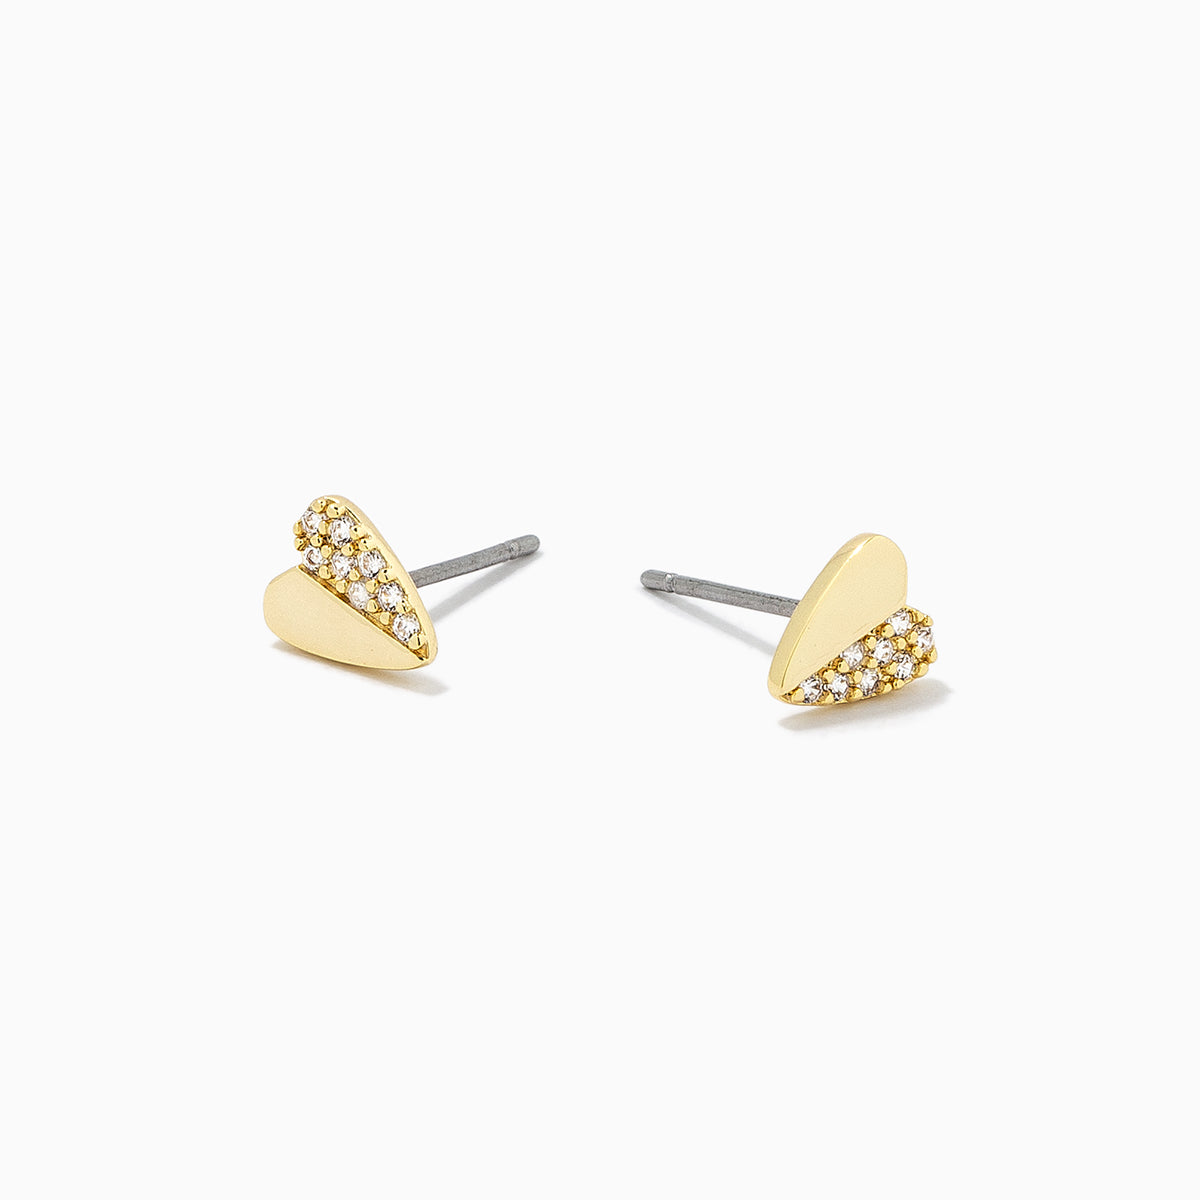 Other Half Heart Stud Earrings | Gold | Product Detail Image | Uncommon James